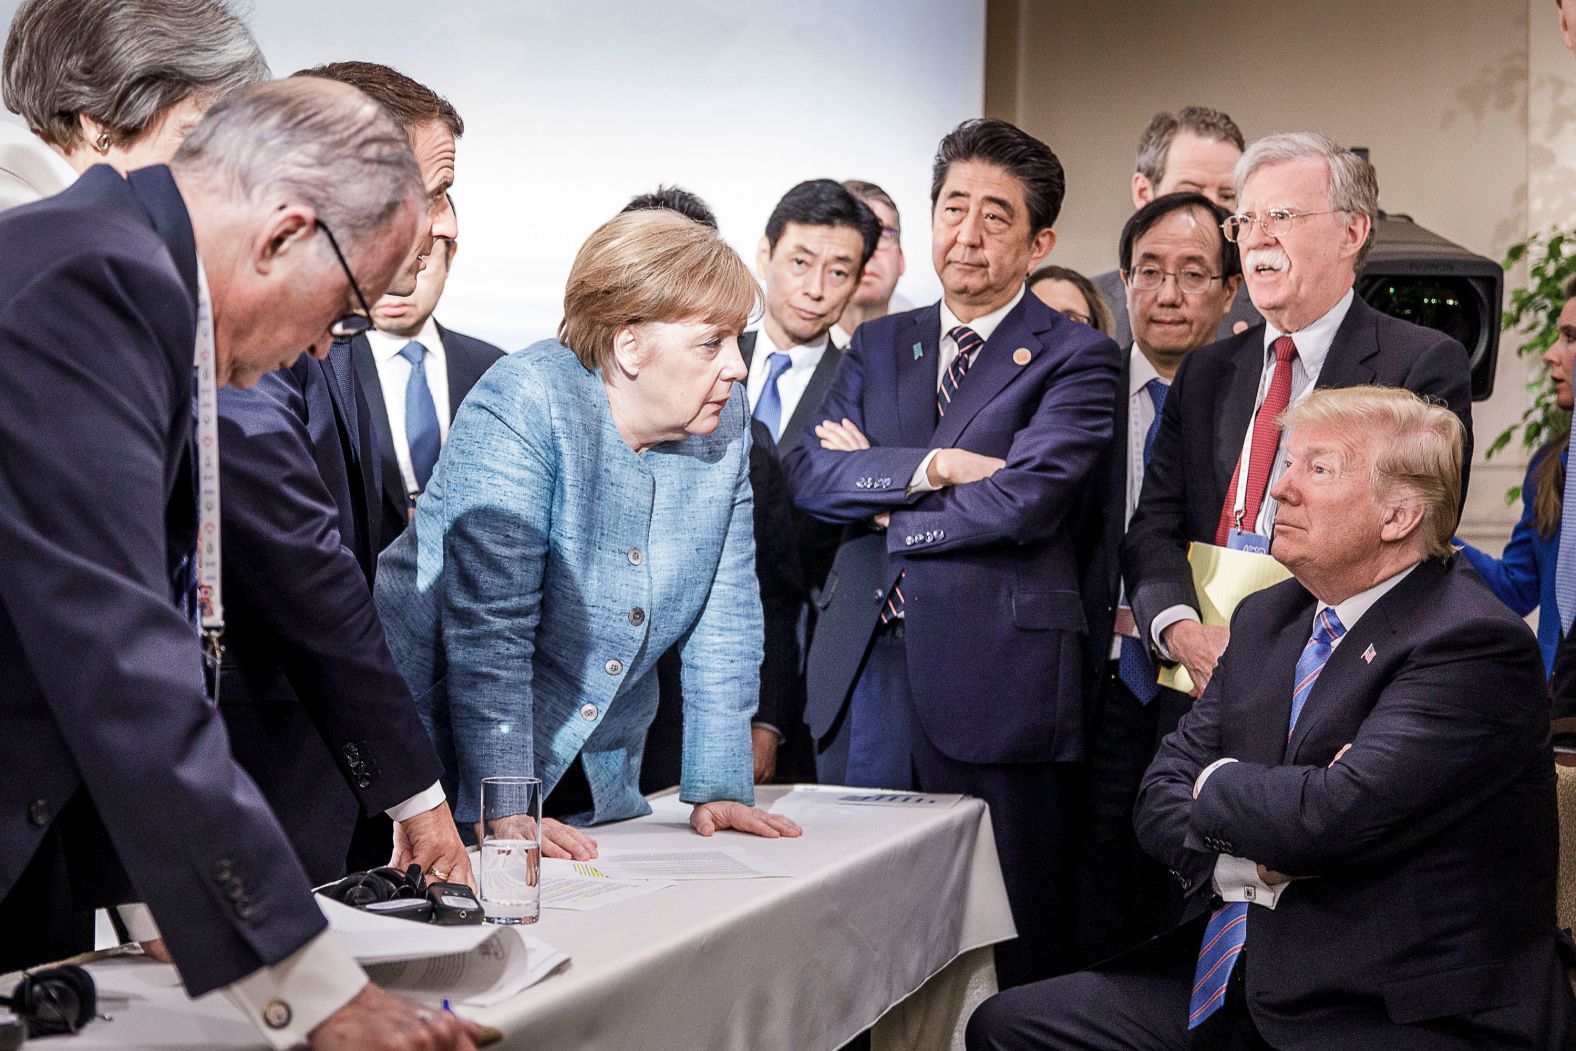 In this photo provided by the German Government Press Office, German Chancellor Angela Merkel talks with a seated Trump as they are surrounded by other leaders at the G7 summit in Charlevoix, Quebec, in June 2018. According to two senior diplomatic sources, <a href="index.php?page=&url=https%3A%2F%2Fwww.cnn.com%2F2018%2F06%2F11%2Fpolitics%2Fg7-photo%2Findex.html" target="_blank">the photo was taken</a> when there was a difficult conversation taking place regarding the G7's communique and several issues the United States had leading up to it.